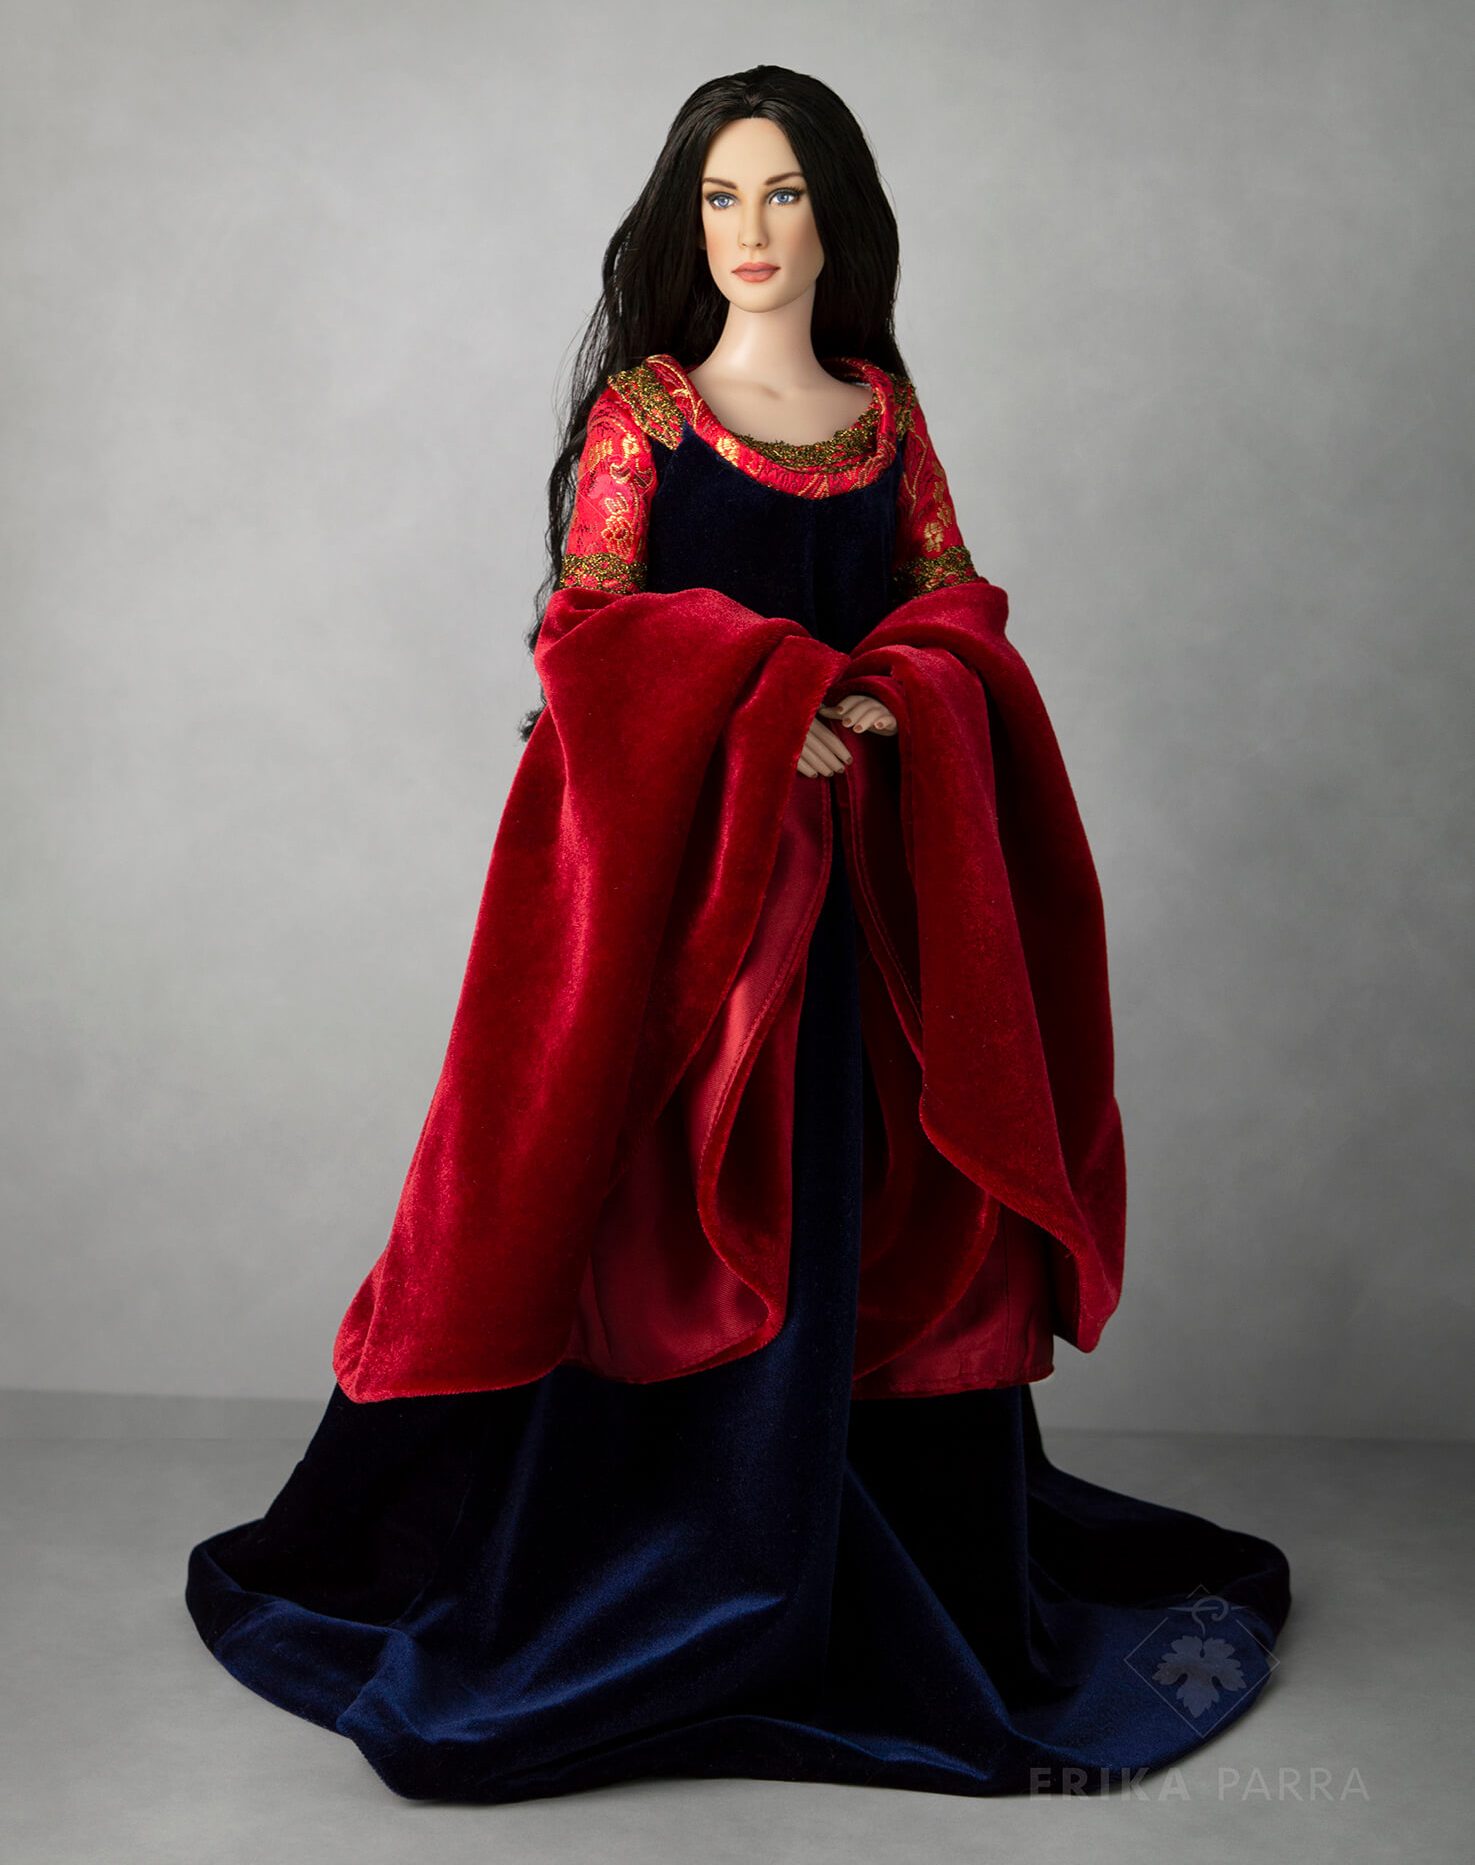 Lord Of the Rings Arwen's Blood Red Doll gown by Erika Parra - Photo by Erika Parra